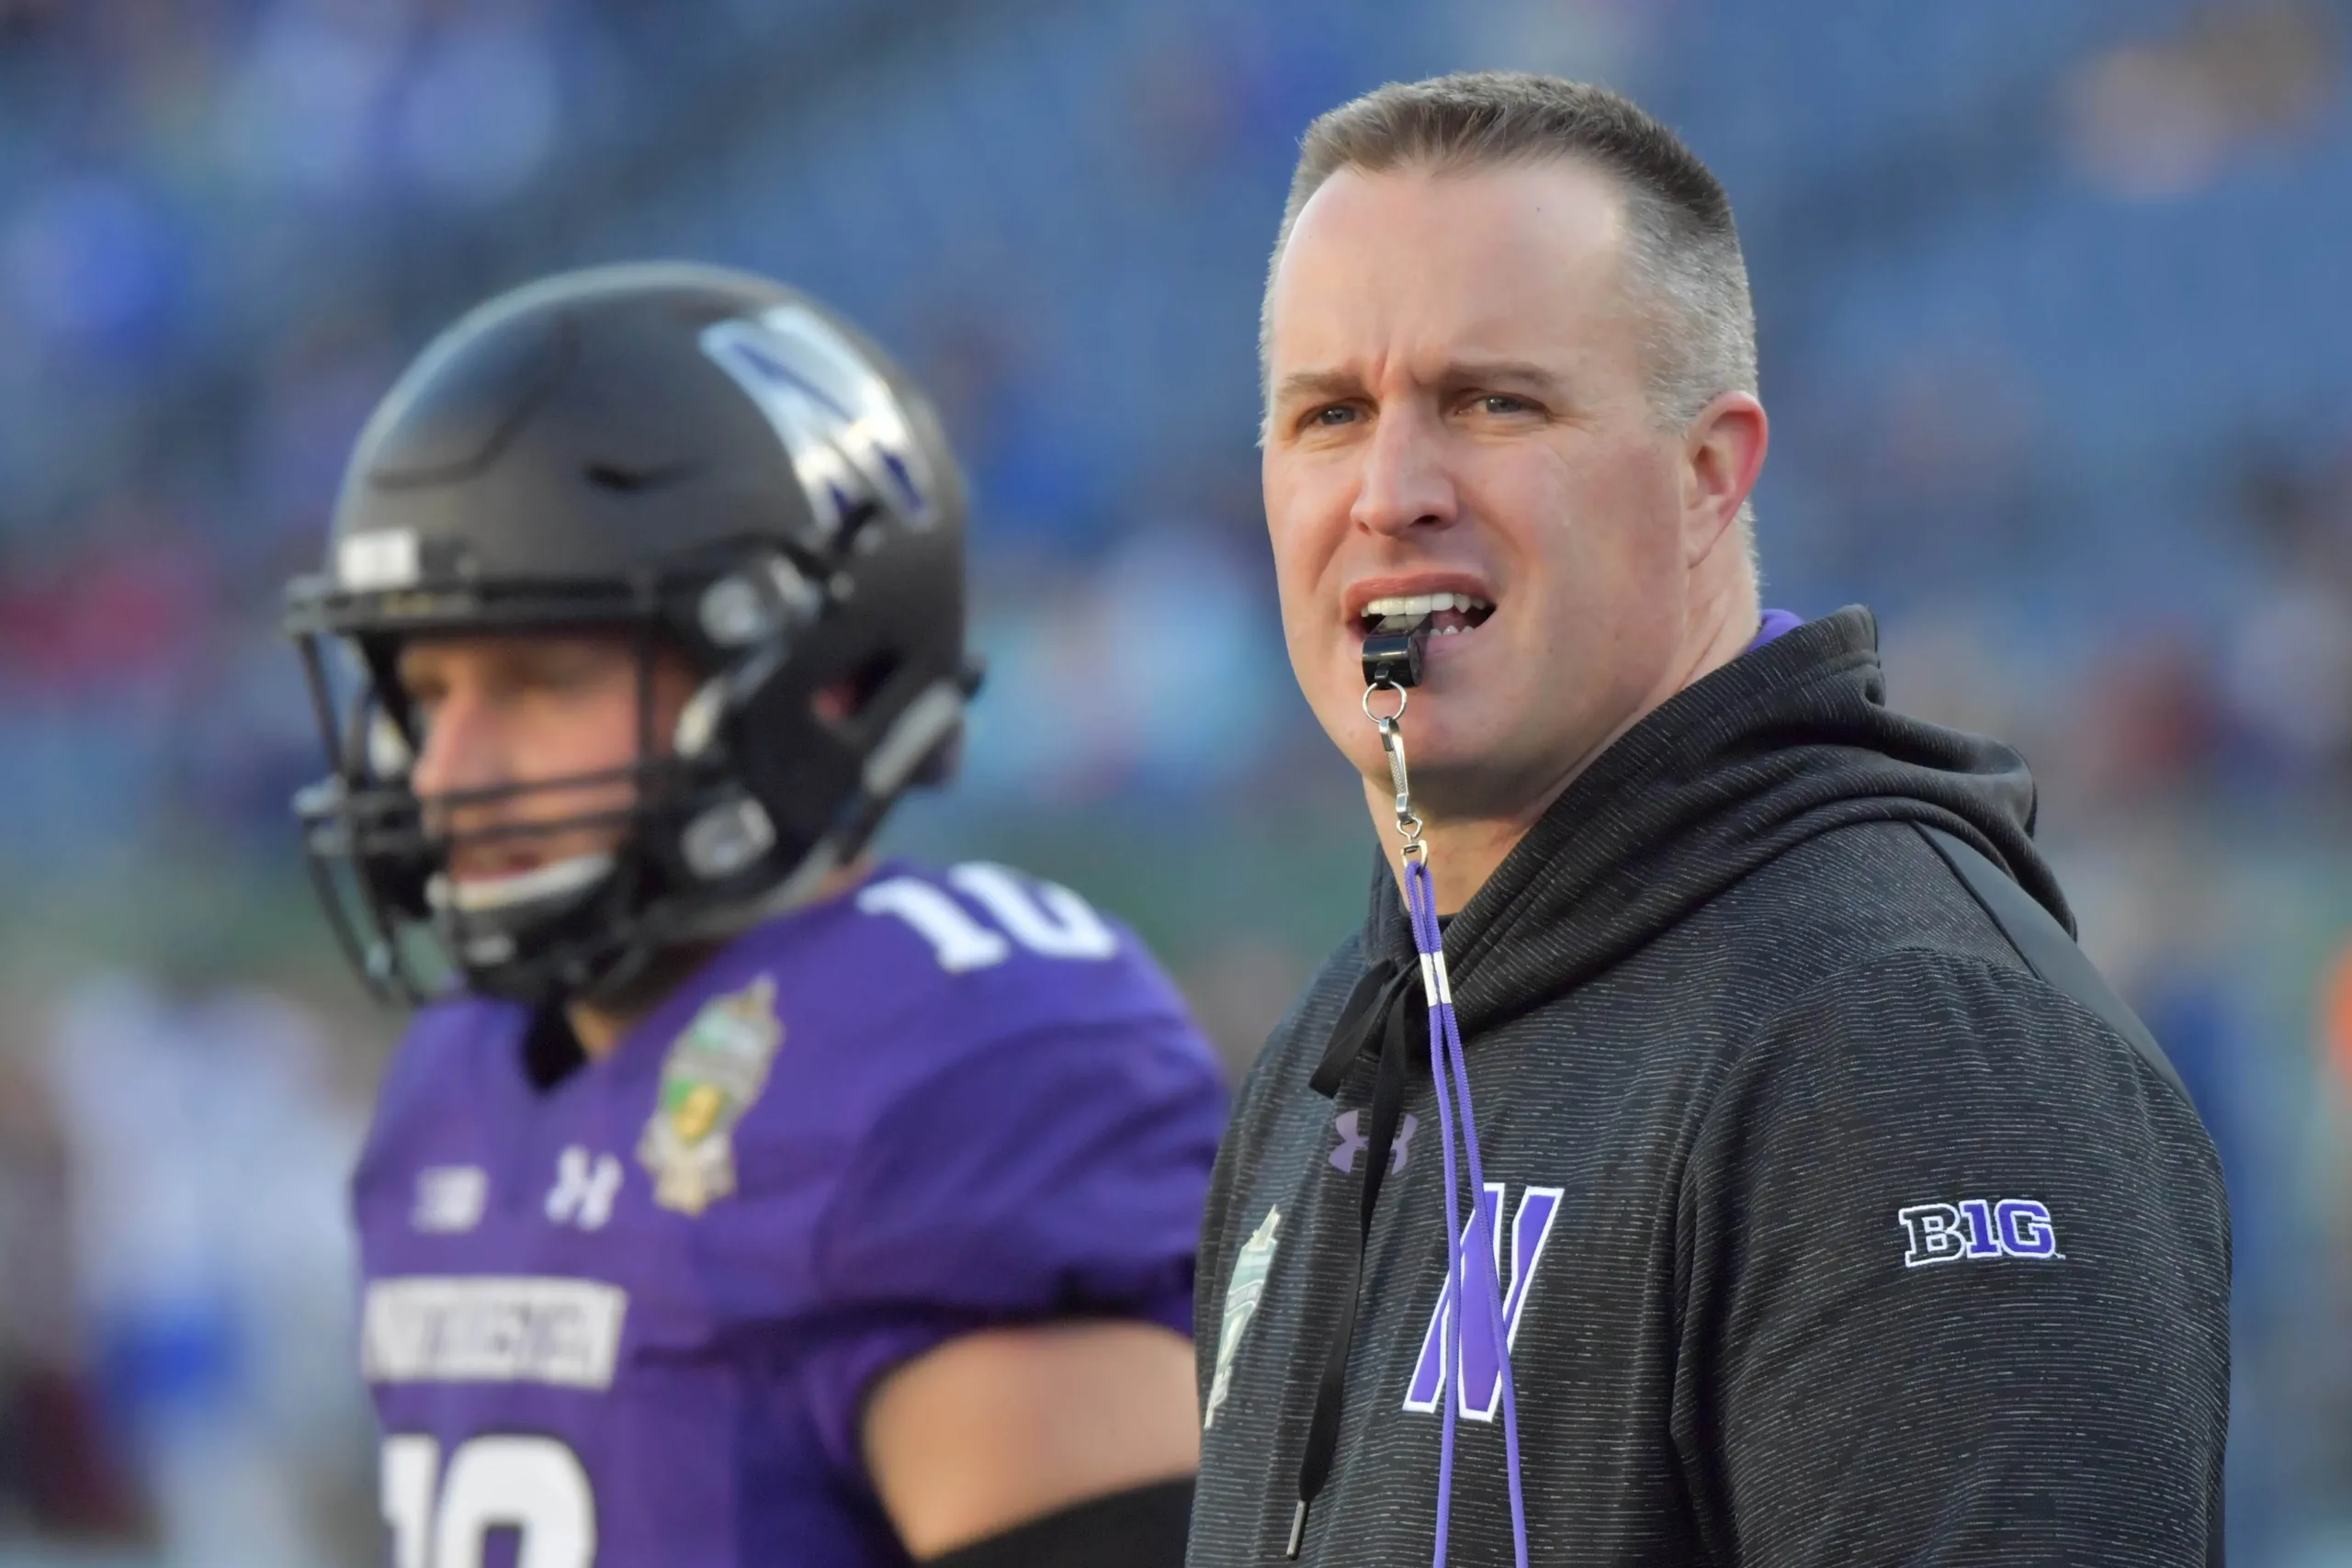 Former Northwestern football coach Pat Fitzgerald (above, right) has filed a $130 million lawsuit against the university for wrongful termination. (Photo courtesy of SATURDAYTRADITION.COM)